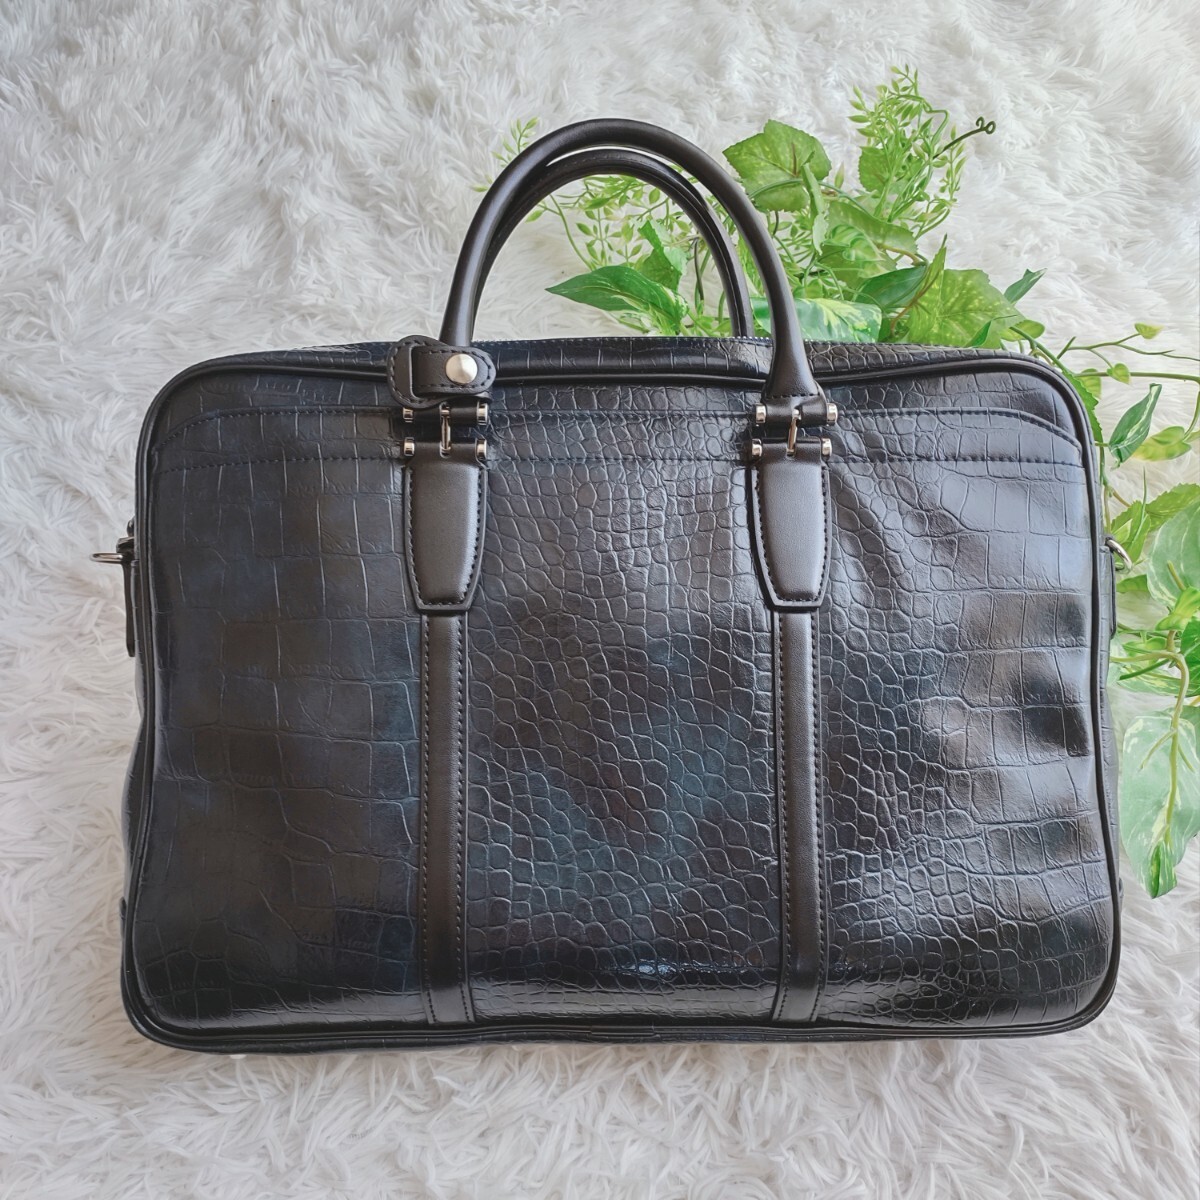 # unused class #2way#THE SUIT COMPANY The suit Company business bag briefcase A4 possible crocodile type pushed gradation navy 